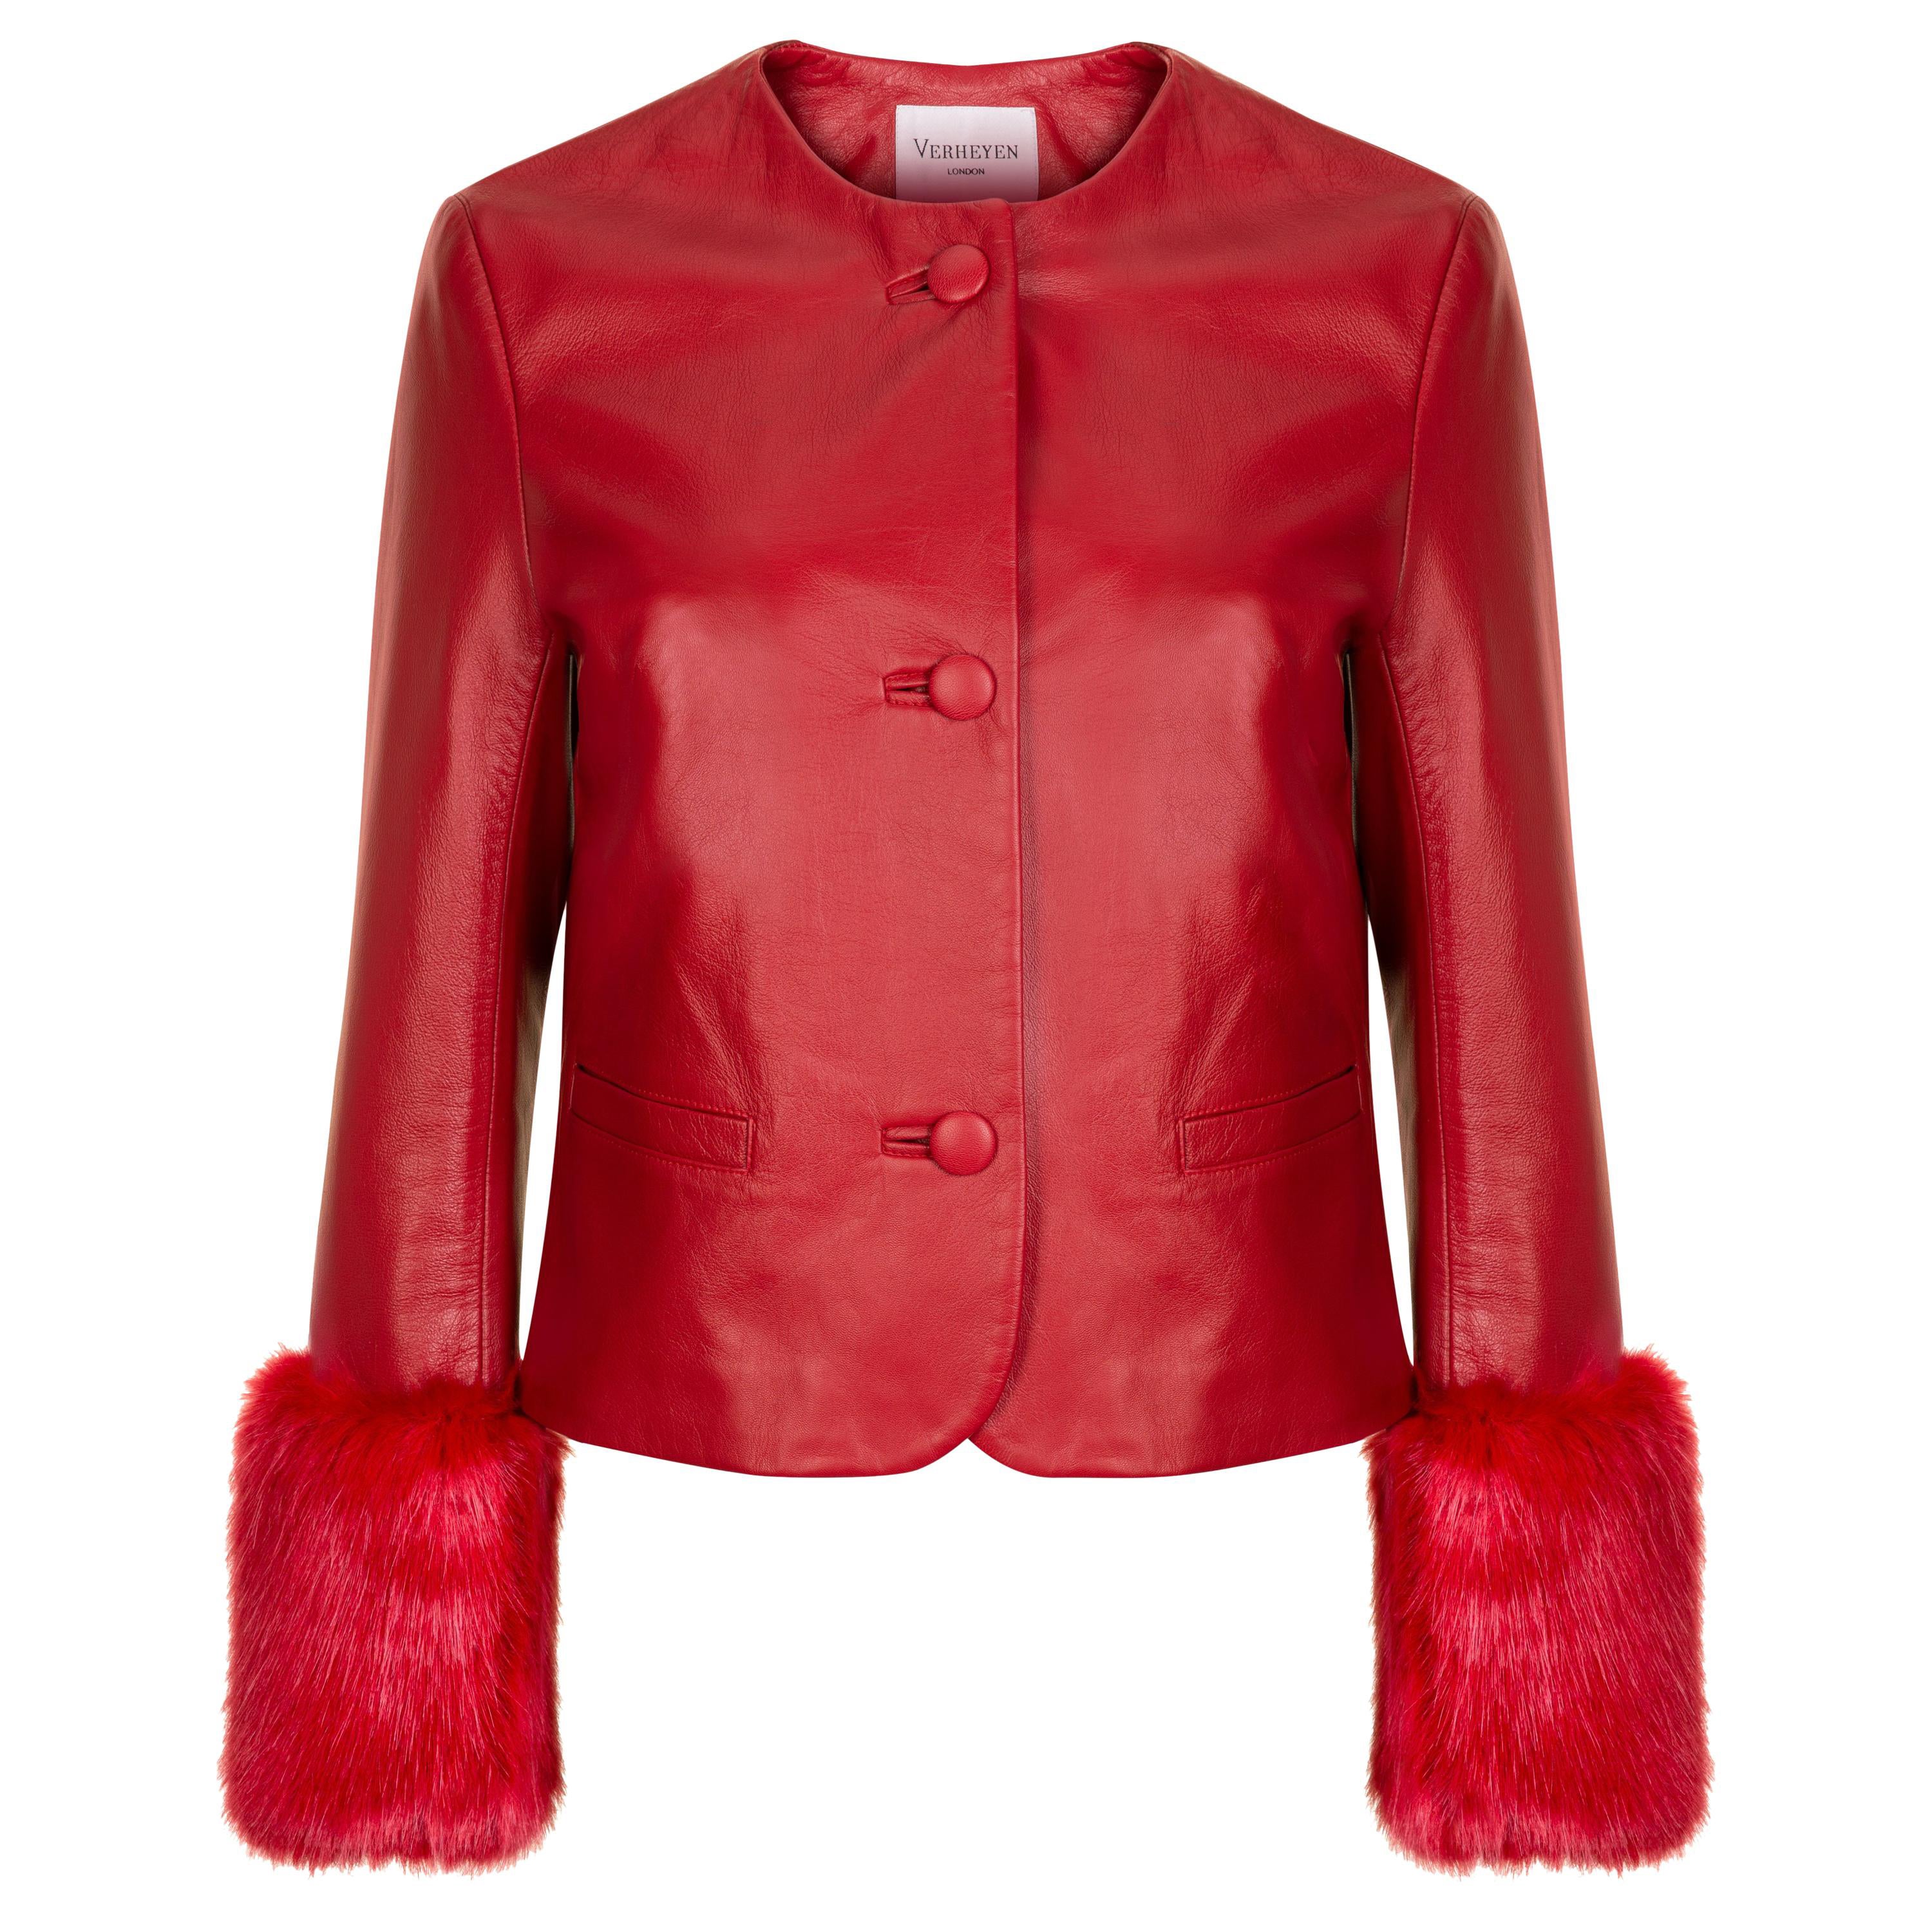 Verheyen Vita Cropped Jacket in Red Leather with Faux Fur - Size uk 12